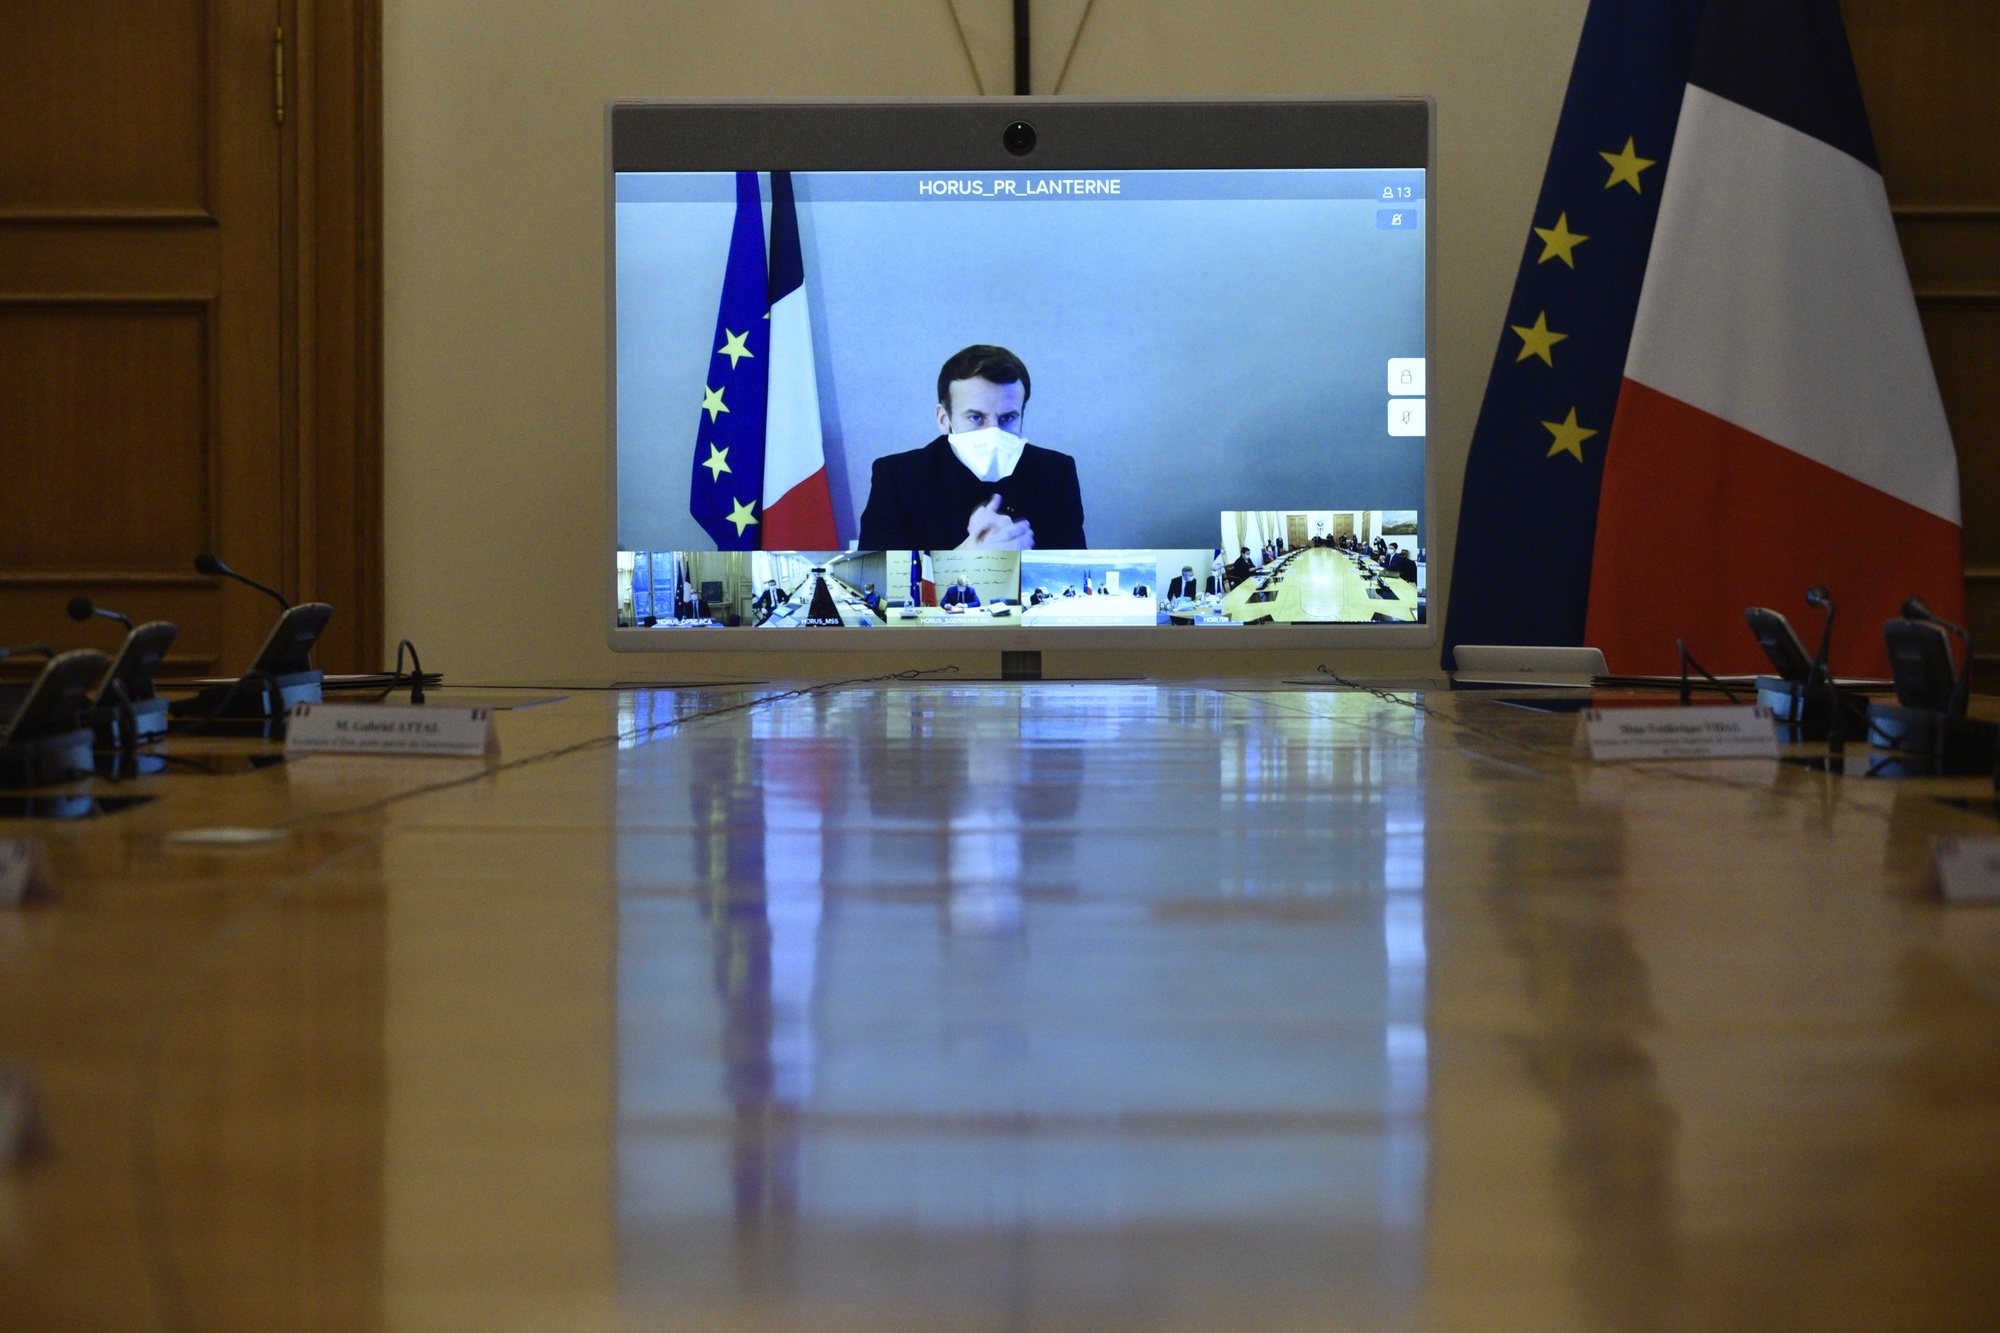 epa08897324 French President Emmanuel Macron, who tested positive for the coronavirus disease (COVID-19), is seen on a screen as he attends by video conference a round table for the weekly cabinet meeting of the government at the Army Ministry in Paris, France, 21 December 2020. According to a statement by the Elysee Palace on 17 December 2020, French President was tested positive for coronavirus Covid-19. Macron will stay in isolation in the presidential residence of &#039;La Lanterne&#039; in Versailles, but will continue to perform his duties.  EPA/JULIEN DE ROSA / POOL